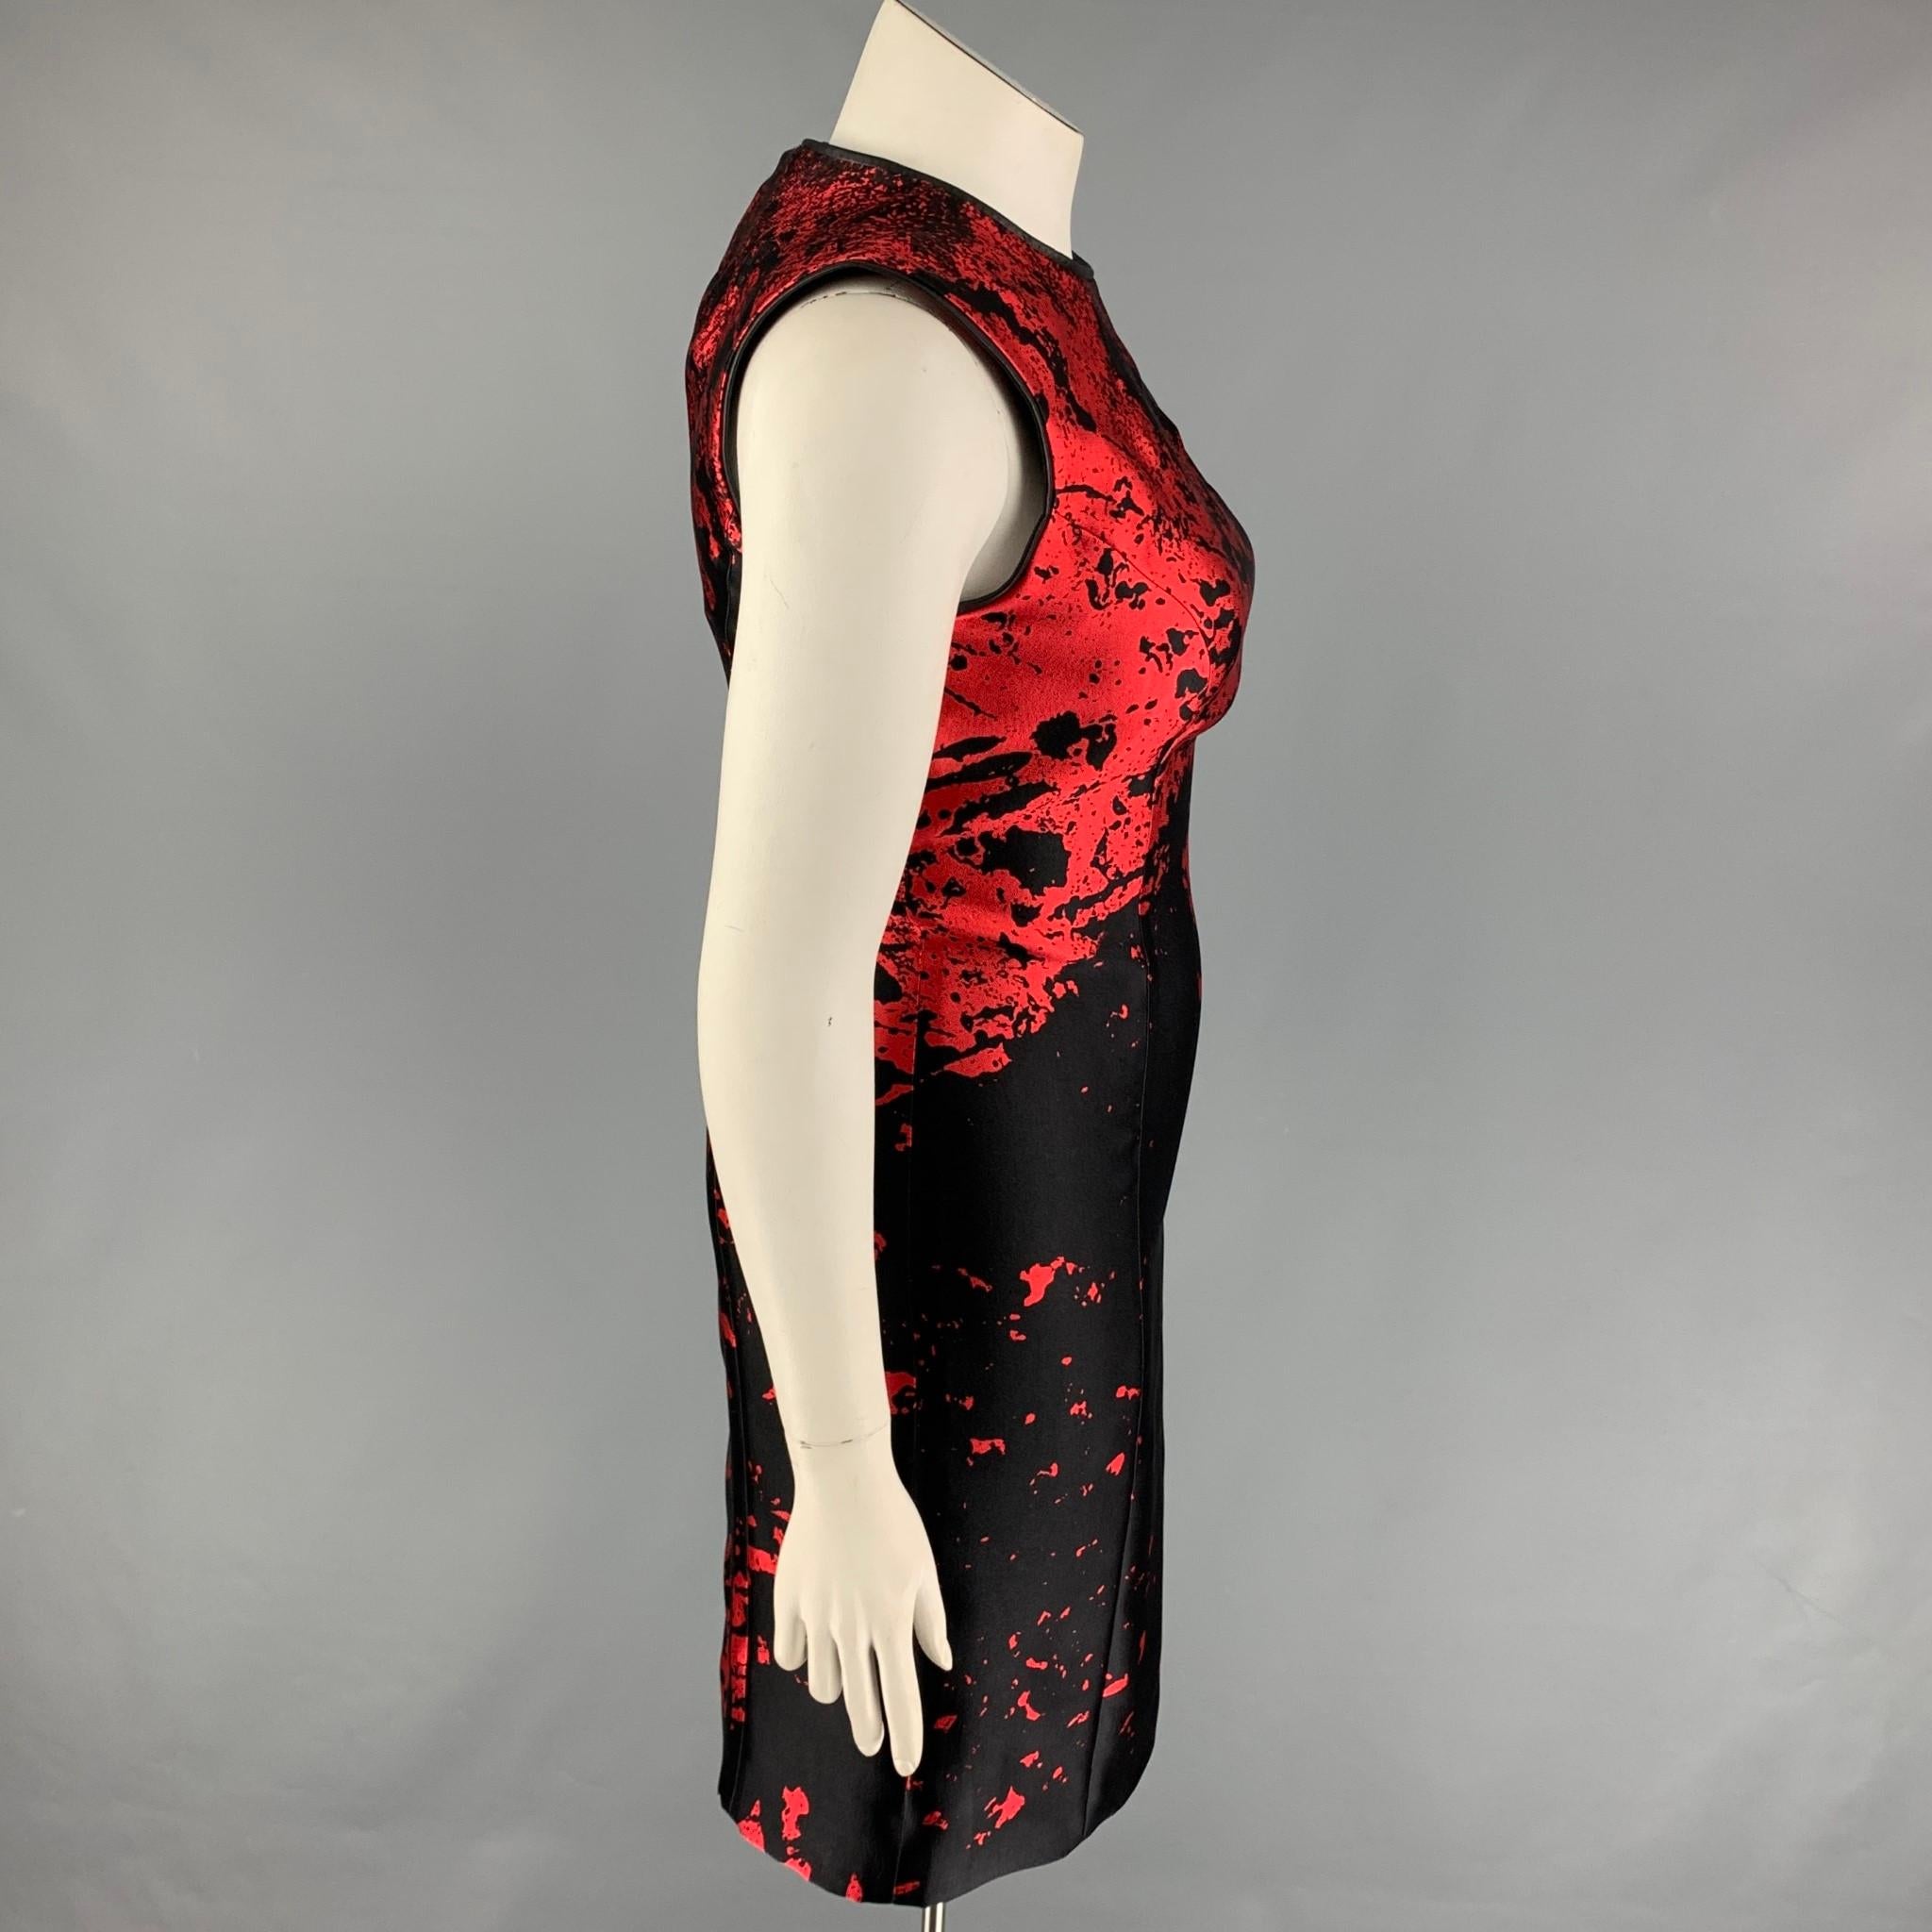 MONIQUE LHUILLIER dress comes in a black & red abstract print wool / lycra featuring a sheath style, leather trim, sleeveless, and a back zip up closure. Made in USA. 

New With Tags. 
Marked: 10
Original Retail Price: